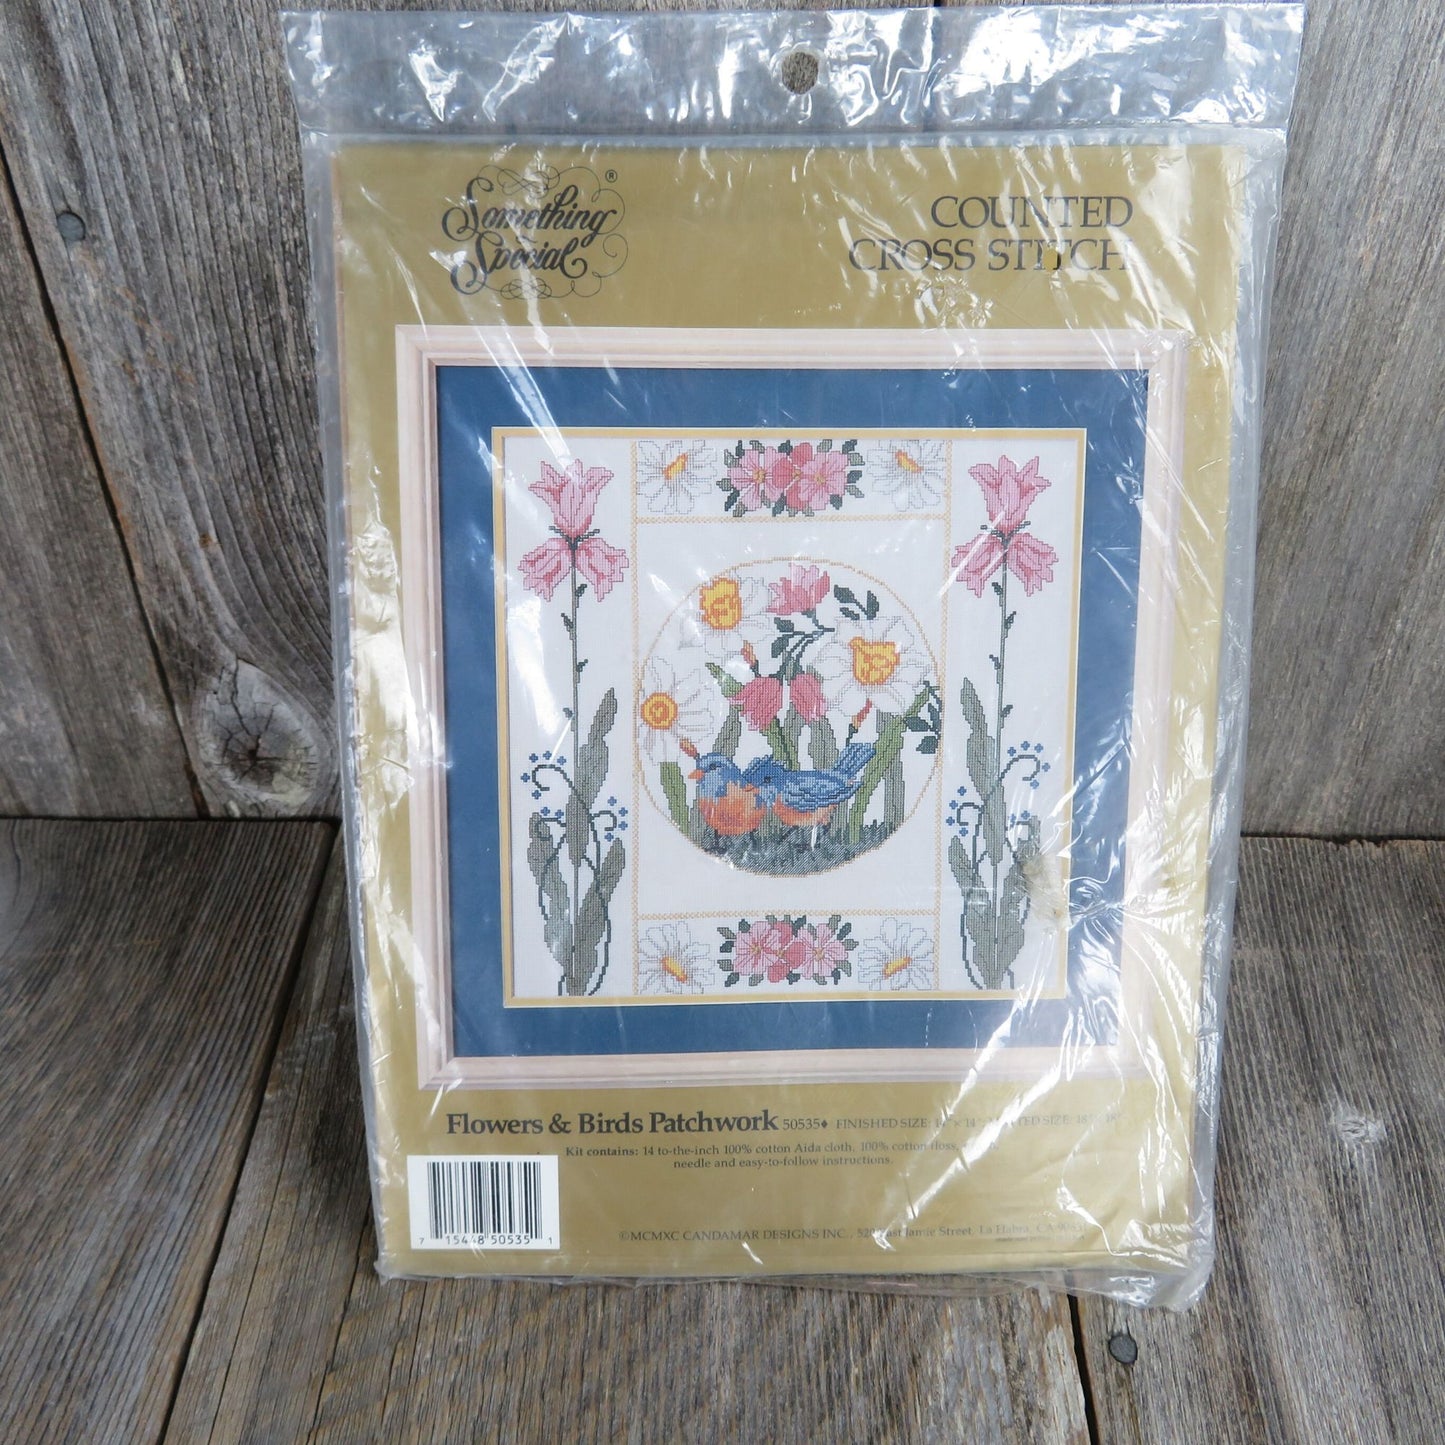 Flowers and Birds Patchwork Counted Cross Stitch Kit Candamar Designs Something Special 50535